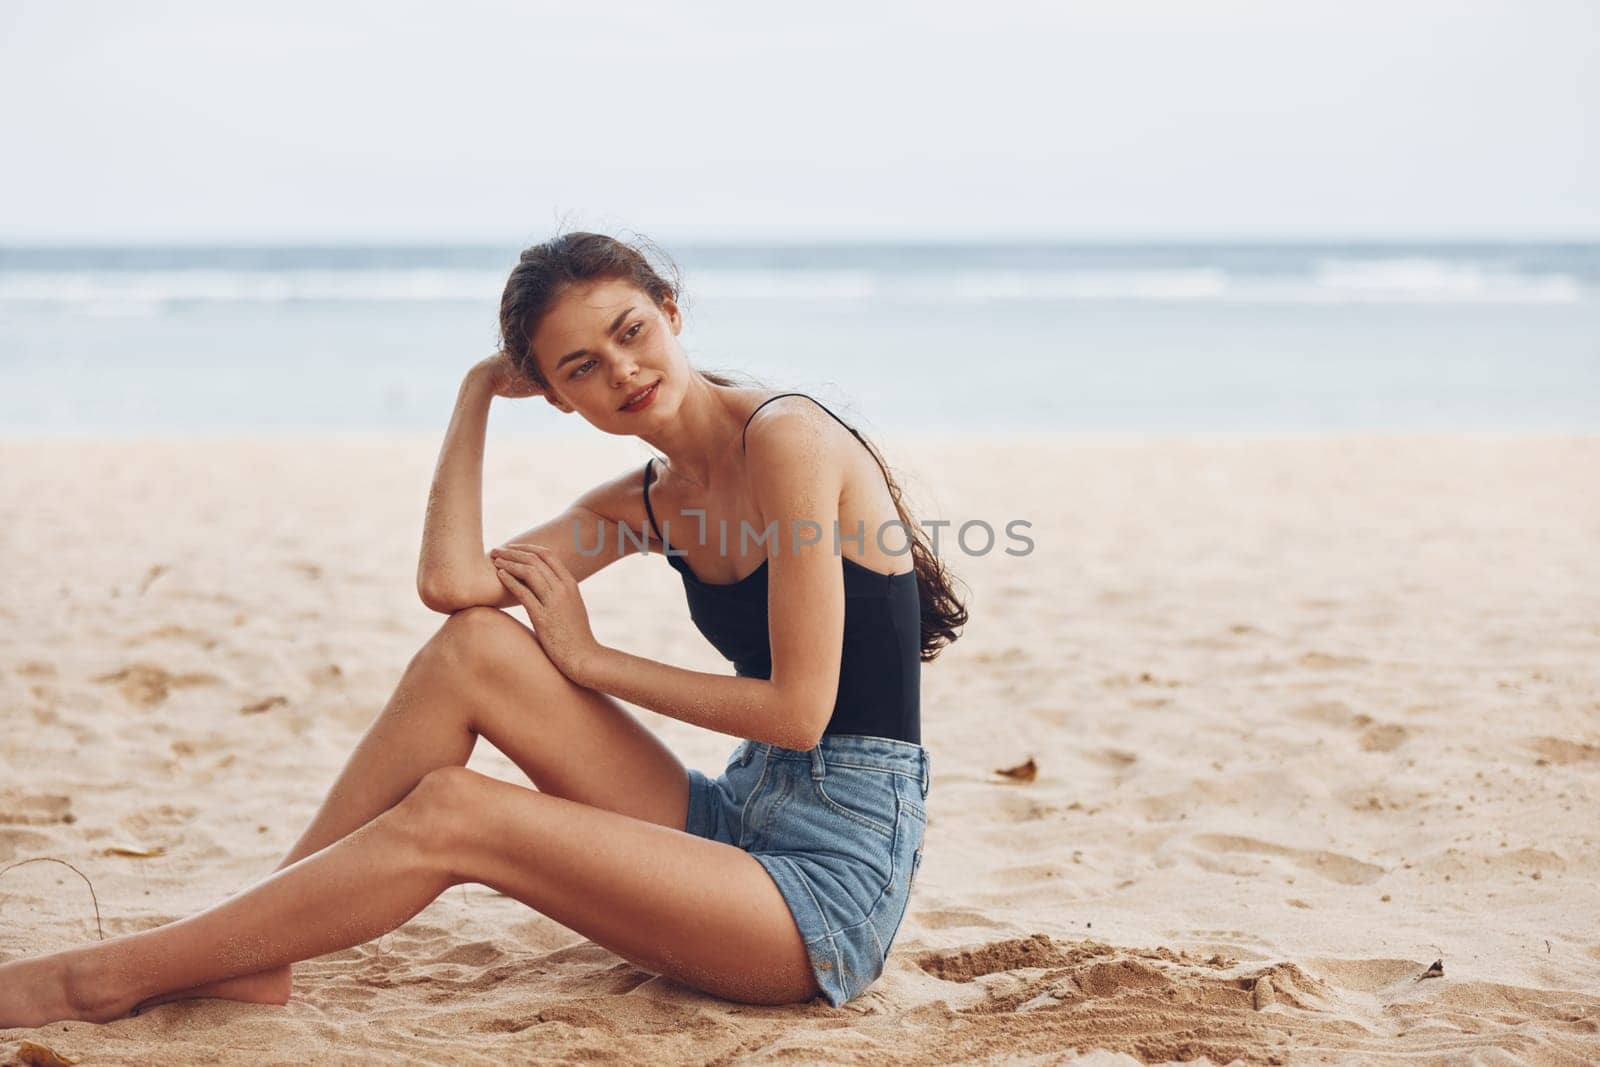 hair woman beautiful lifestyle attractive sea adult natural sand travel smile girl beach bali water carefree nature freedom vacation ocean sitting